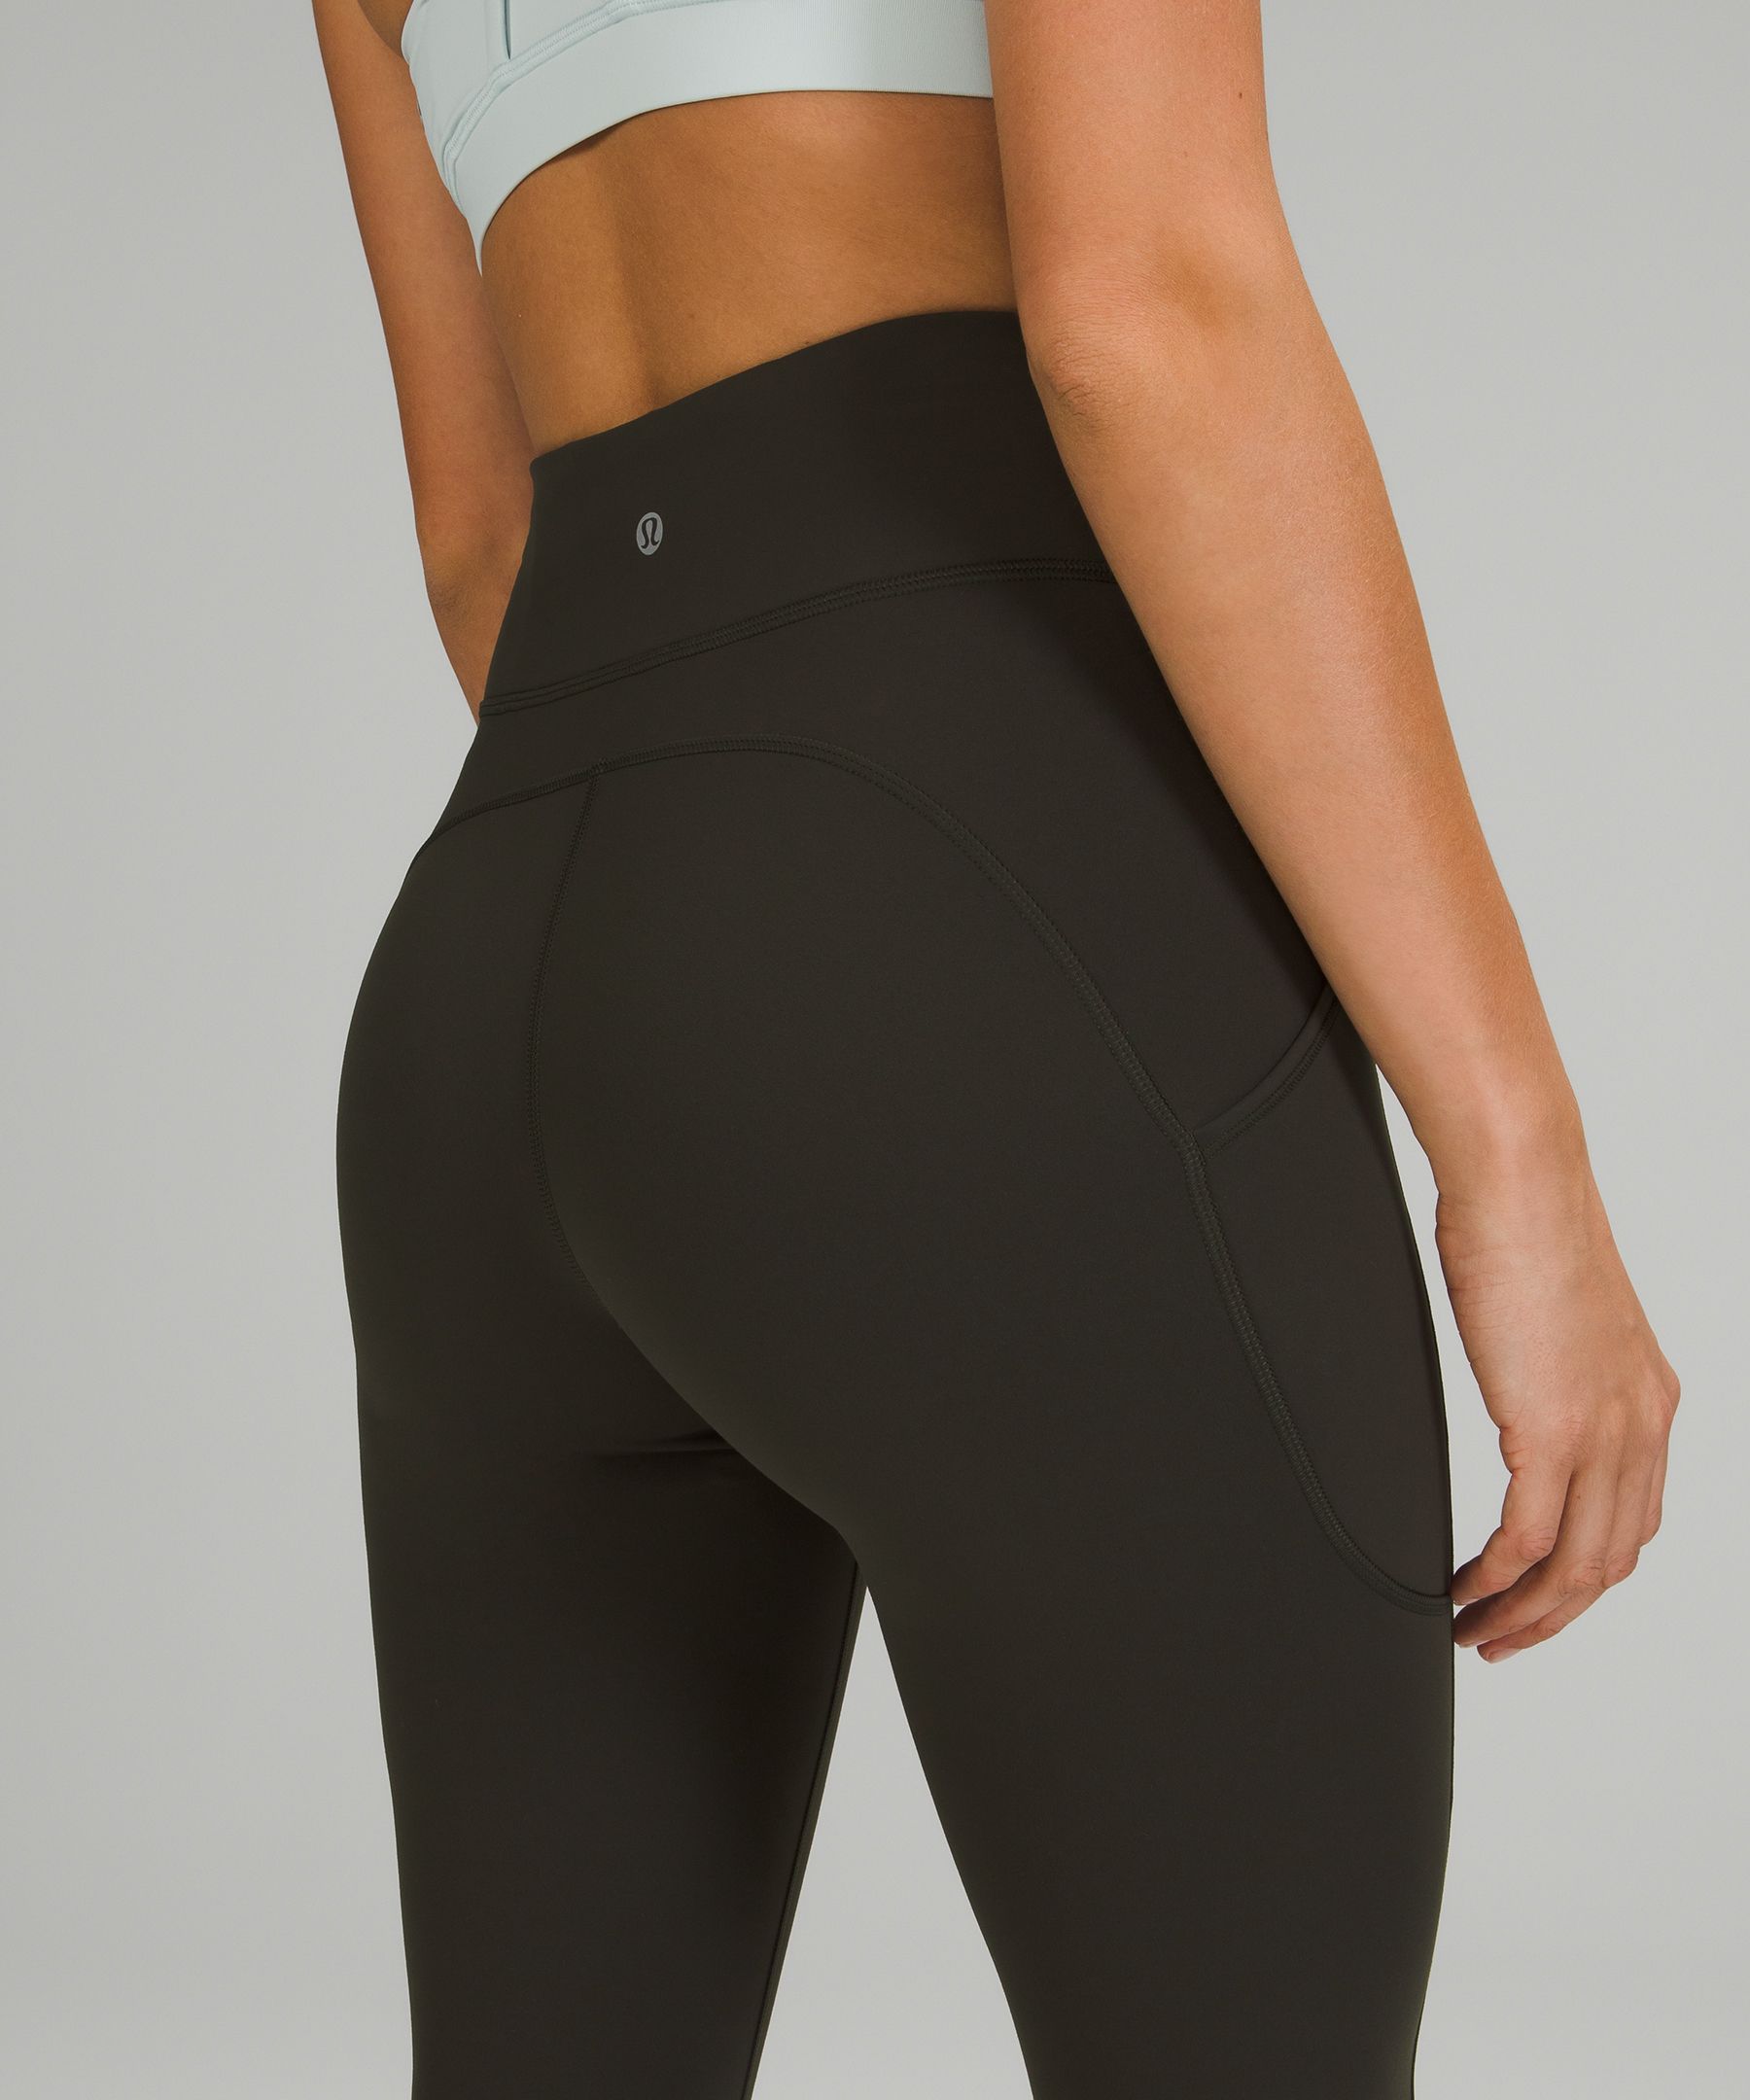 Lululemon Invigorate High-Rise Tight 28 *Online Only - 132151709